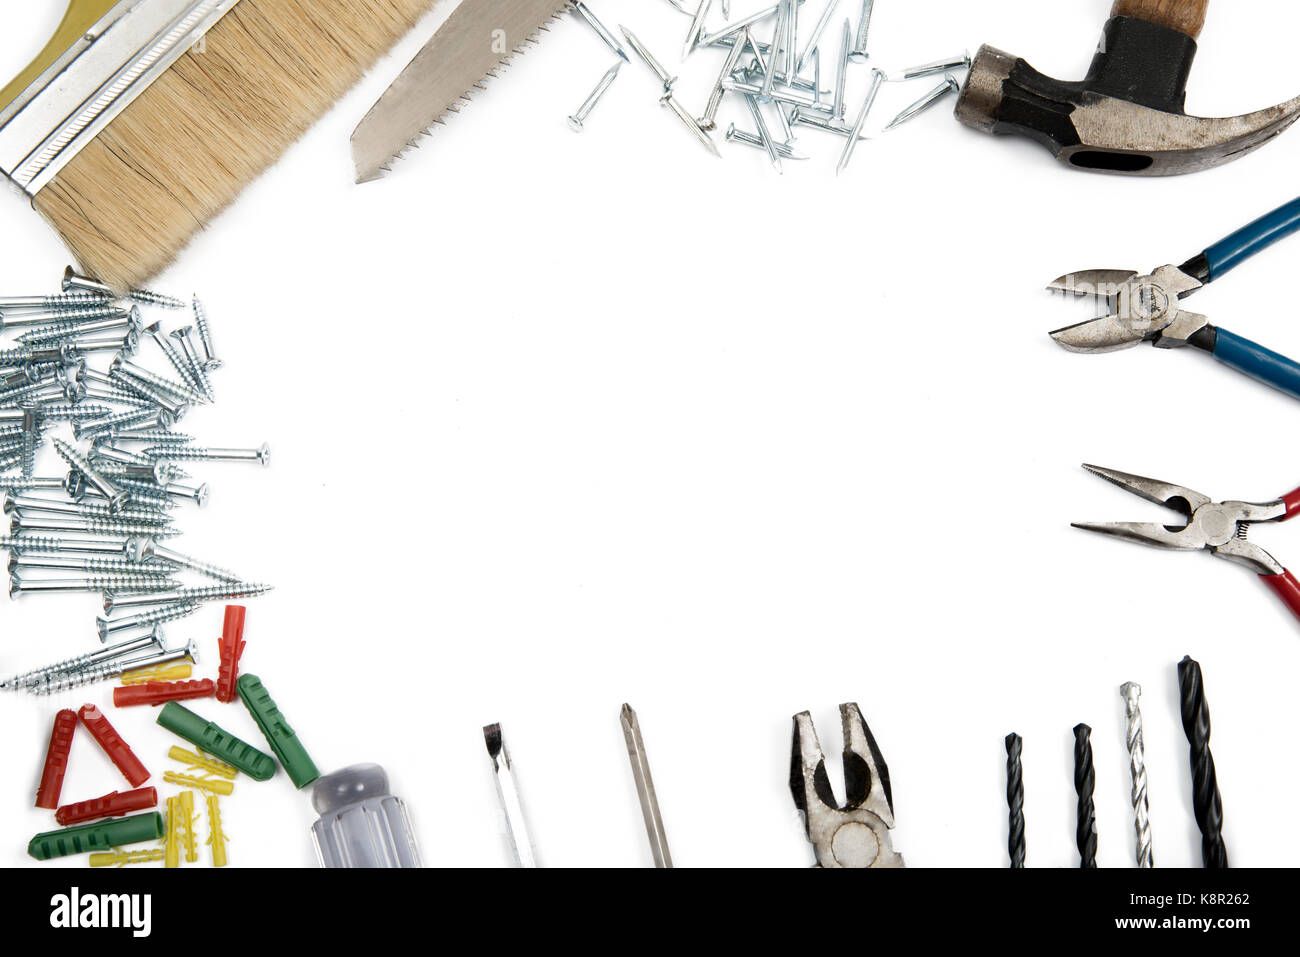 Border frame of Construction Tools on white background. Copy space inside. Stock Photo